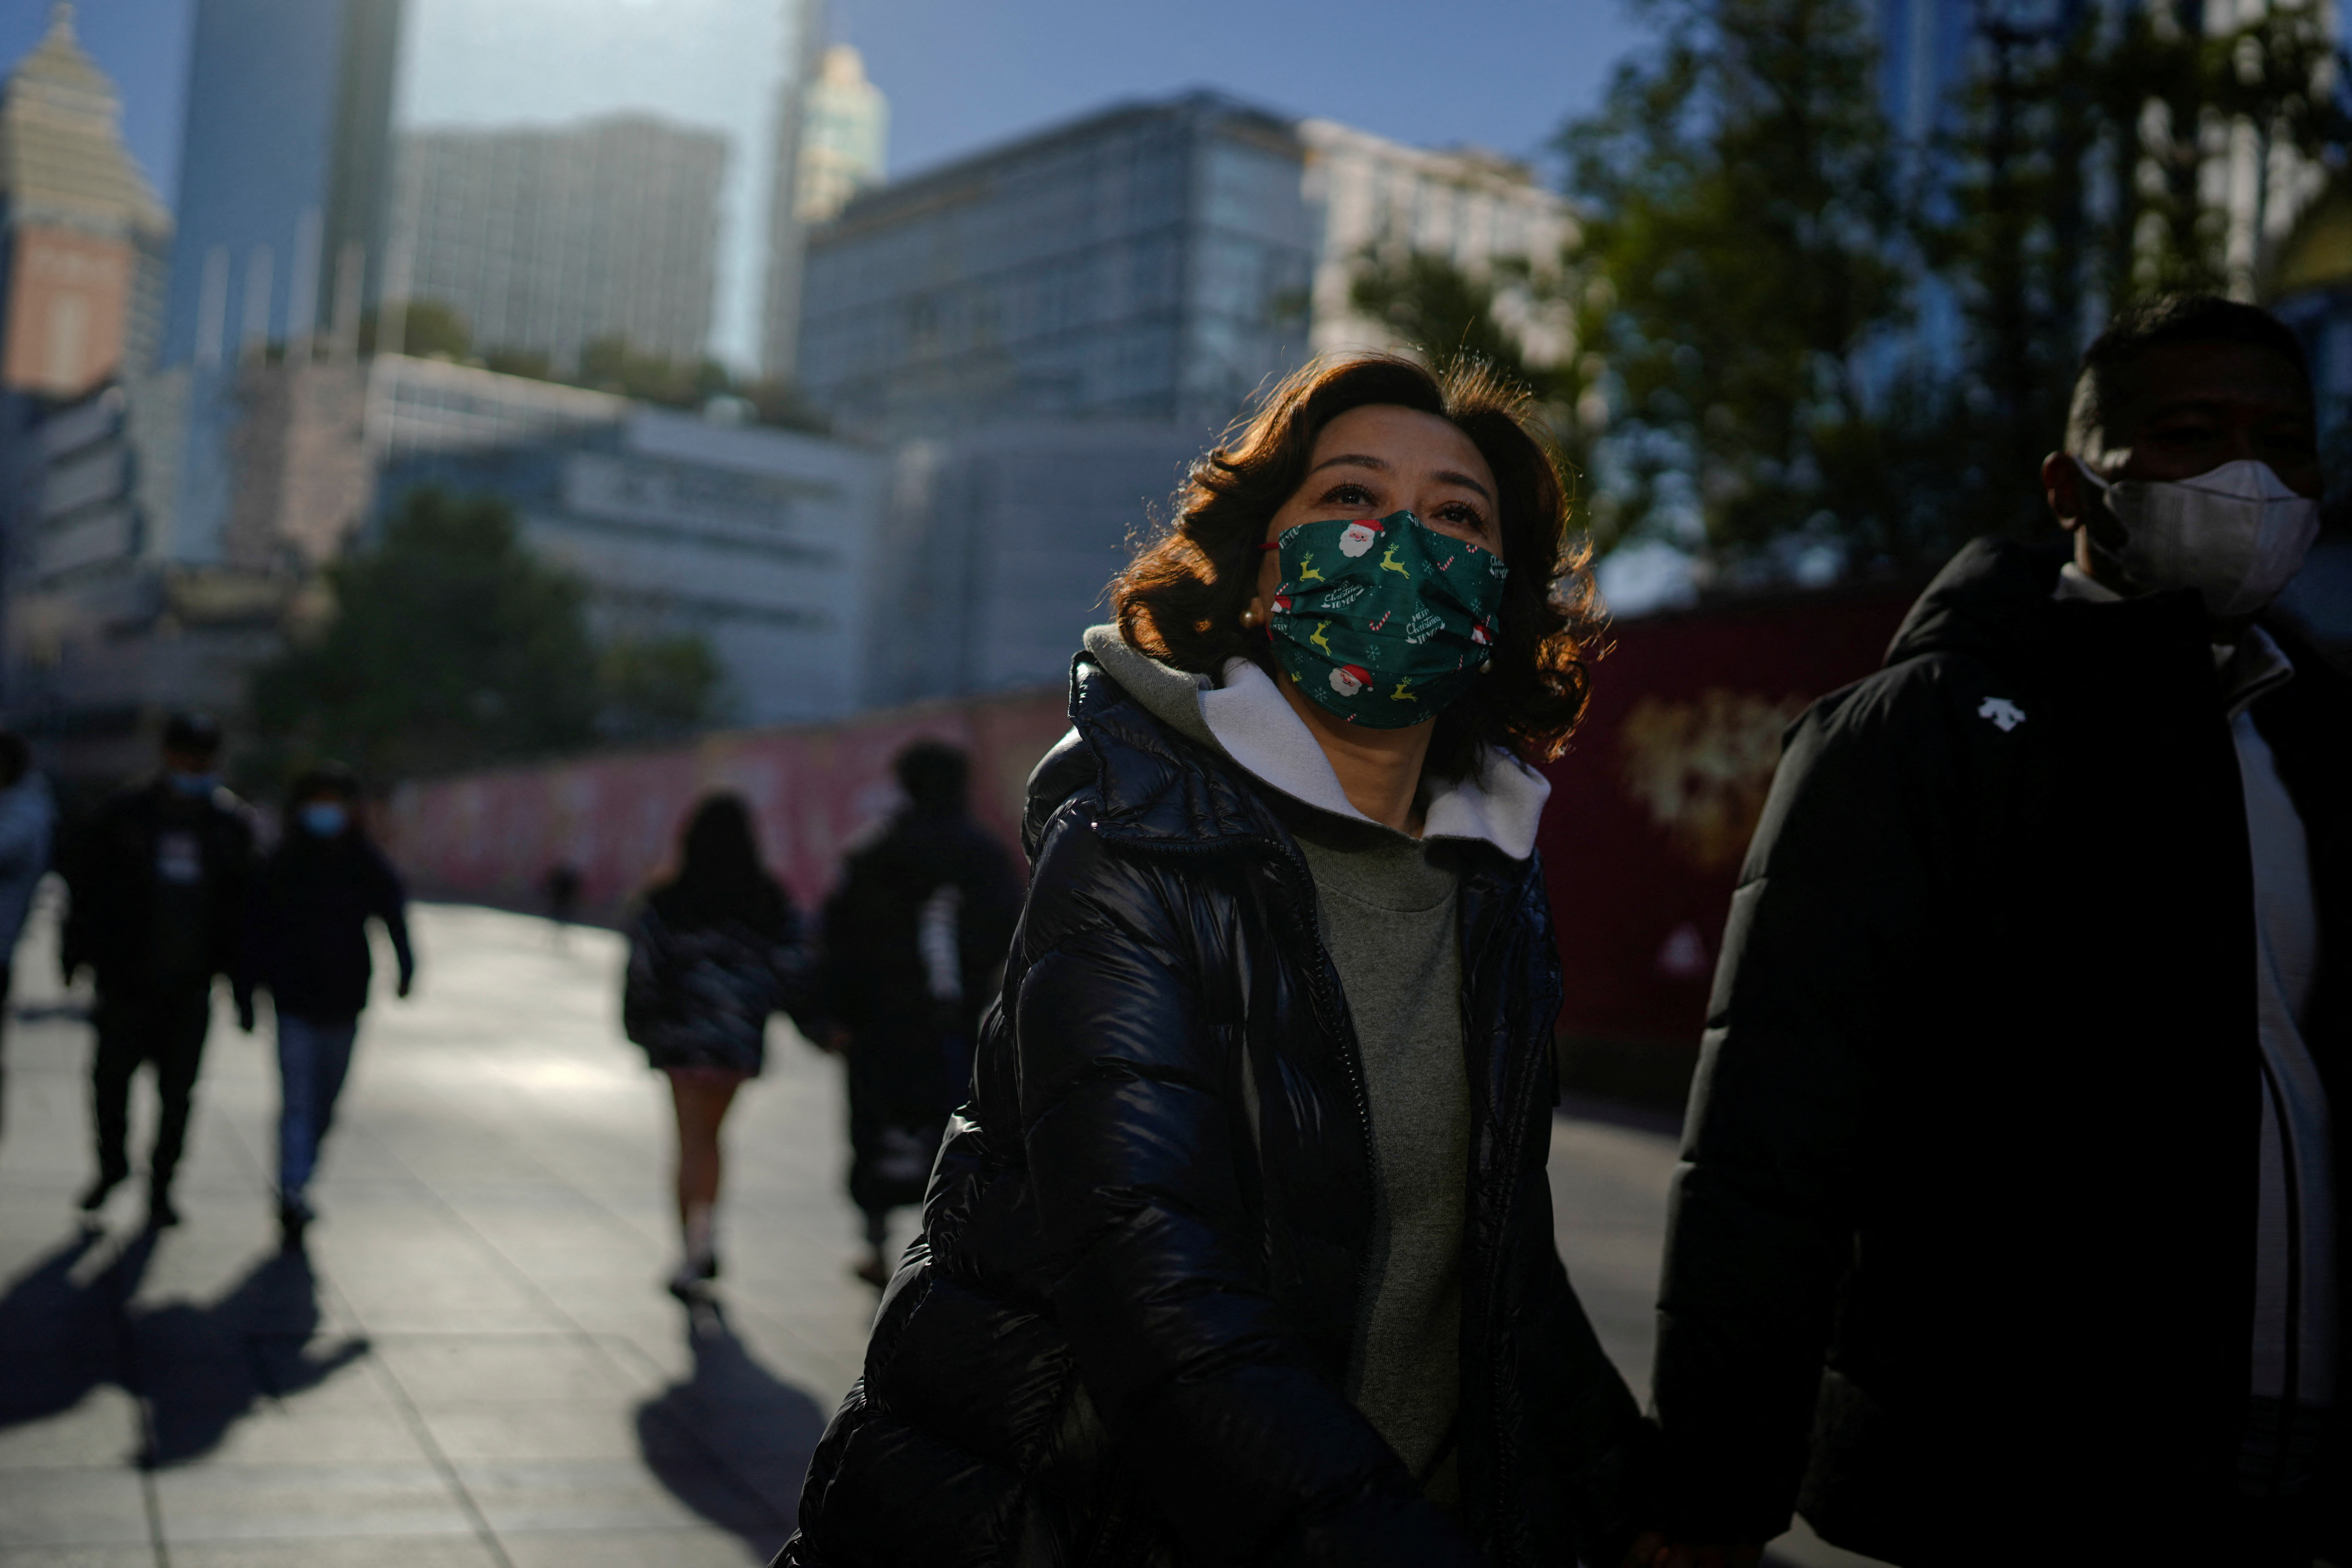 People return to work despite continuing COVID-19 outbreak in Shanghai